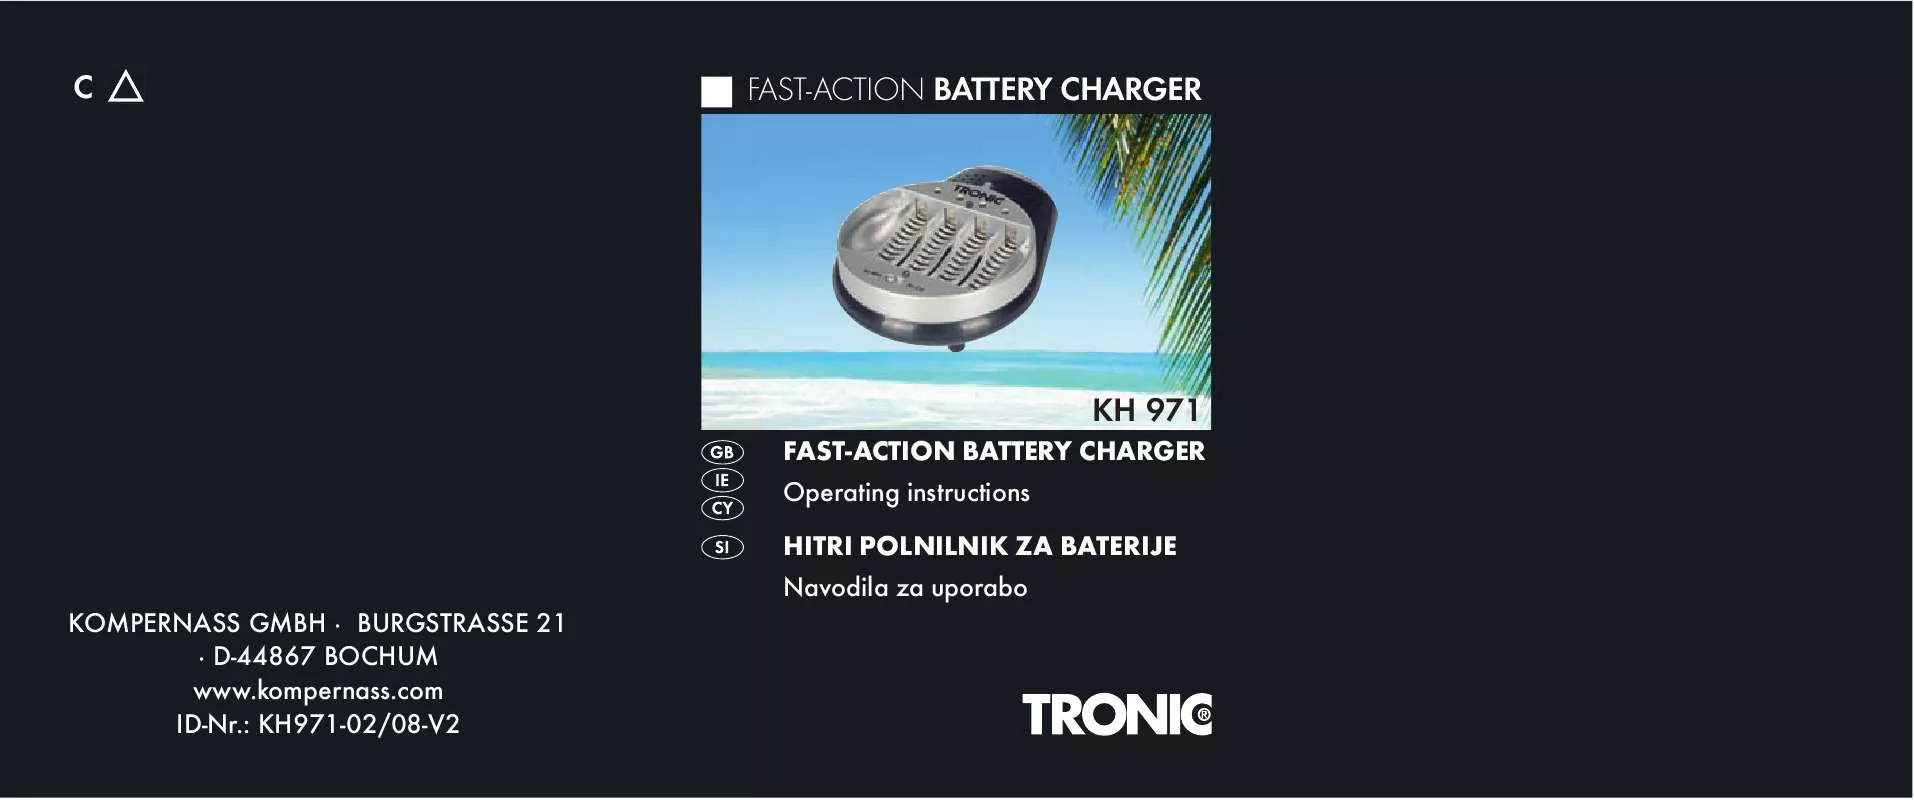 Mode d'emploi TRONIC KH 971 RAPID BATTERY CHARGER